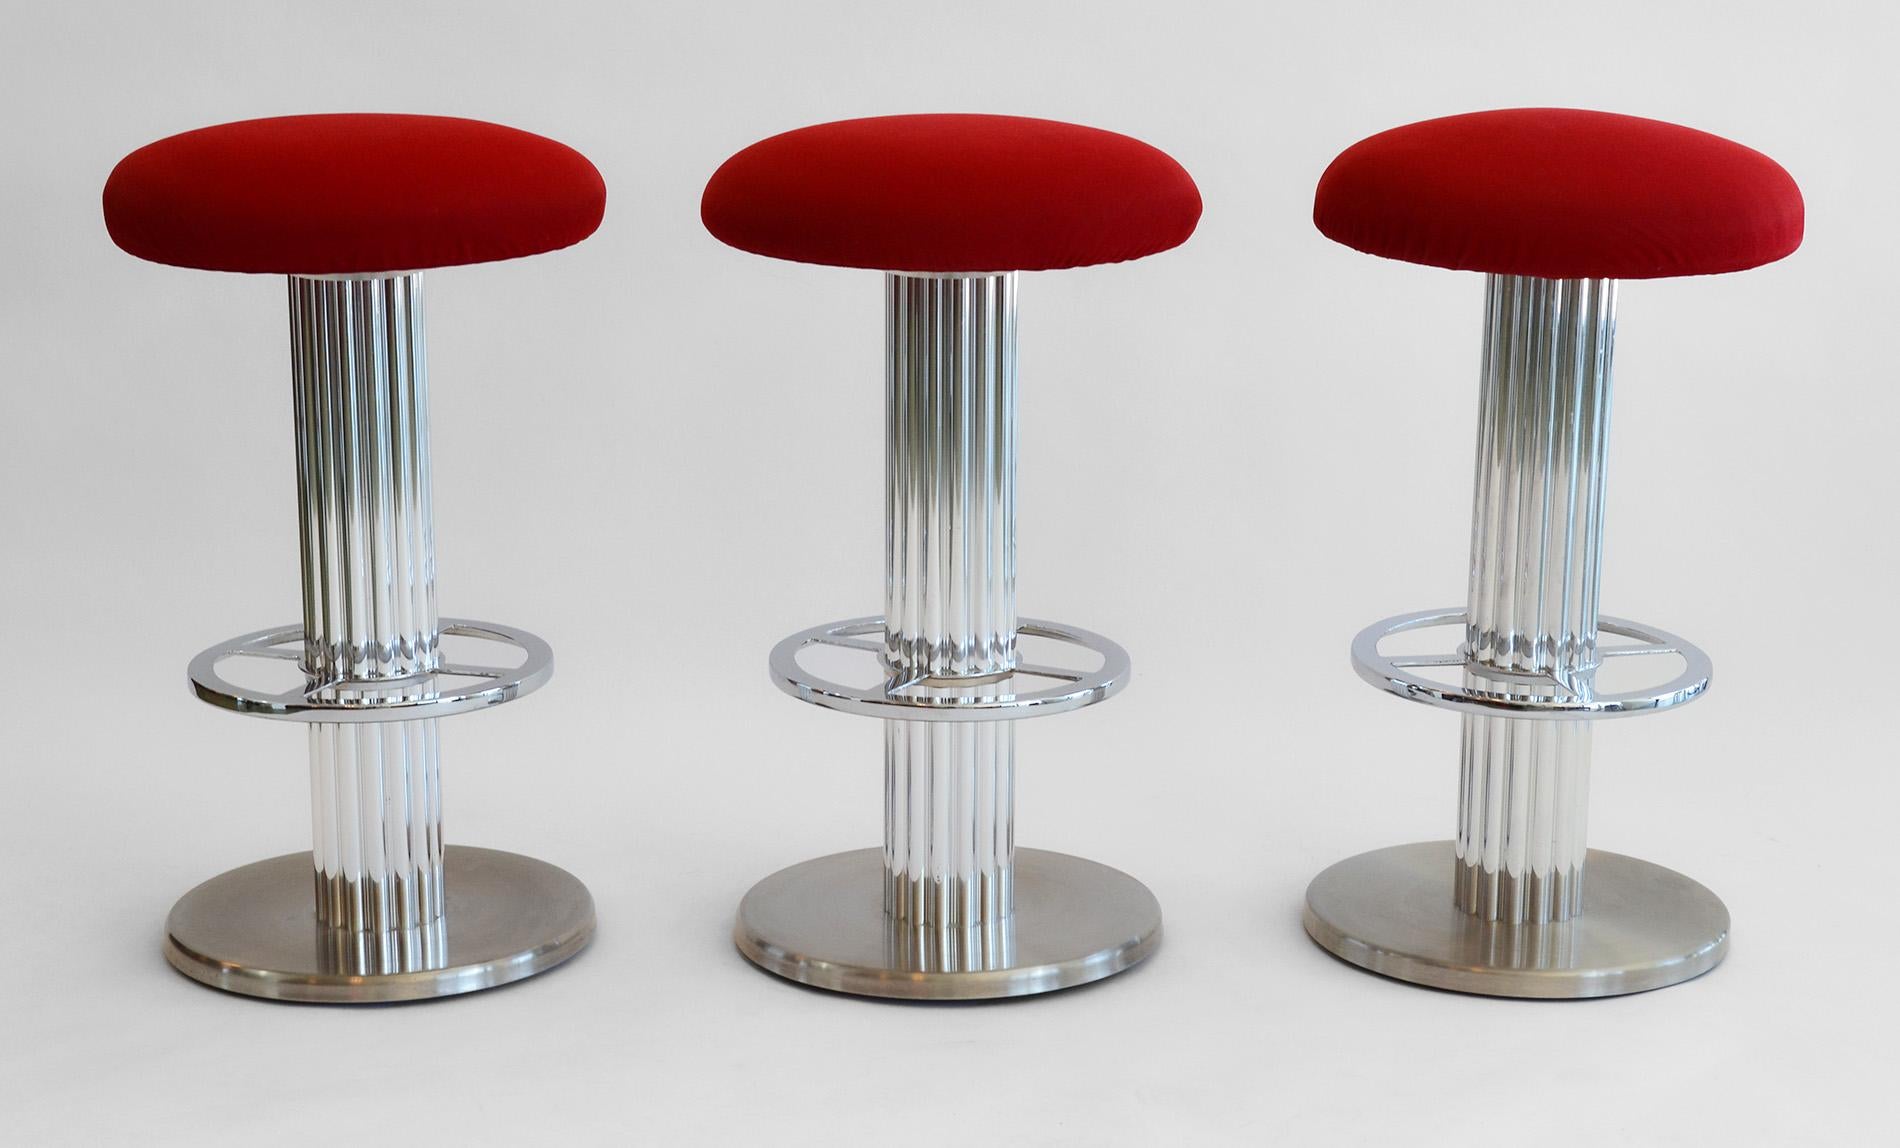 Set of Three Design For Leisure Modern Steel Bar or Counter Swivel Stools 1980s
Bar stools in polished and brushed nickel over steel frames with newer red upholstery on cushion seat. Stools are very heavy. Post Modern or Art Deco polished aluminum